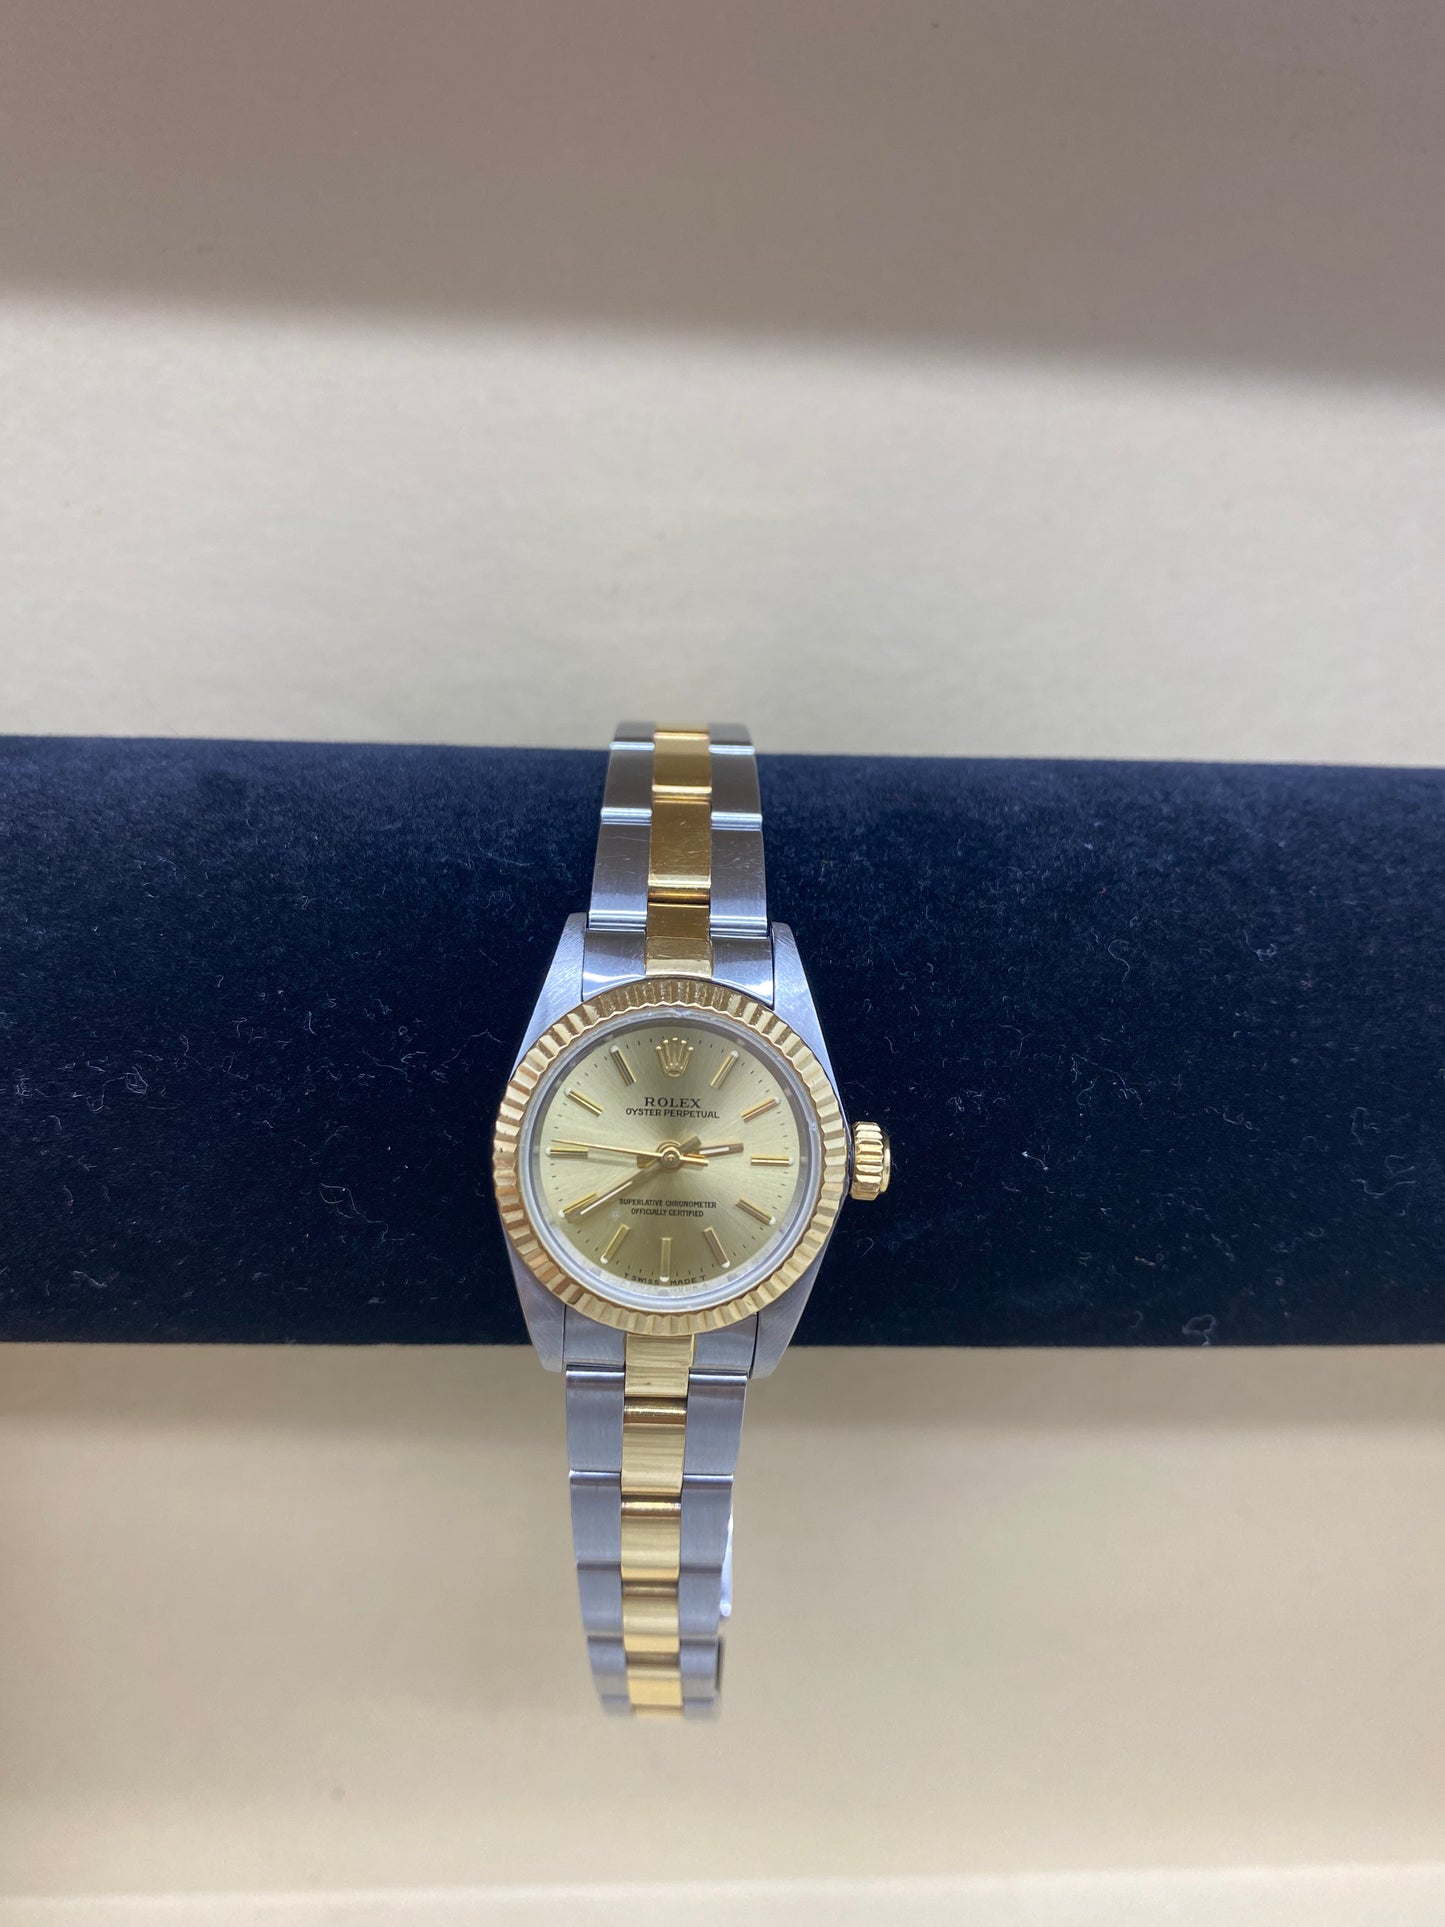 ROLEX LADIES OYSTER PERPETUAL 2-TONE WATCH